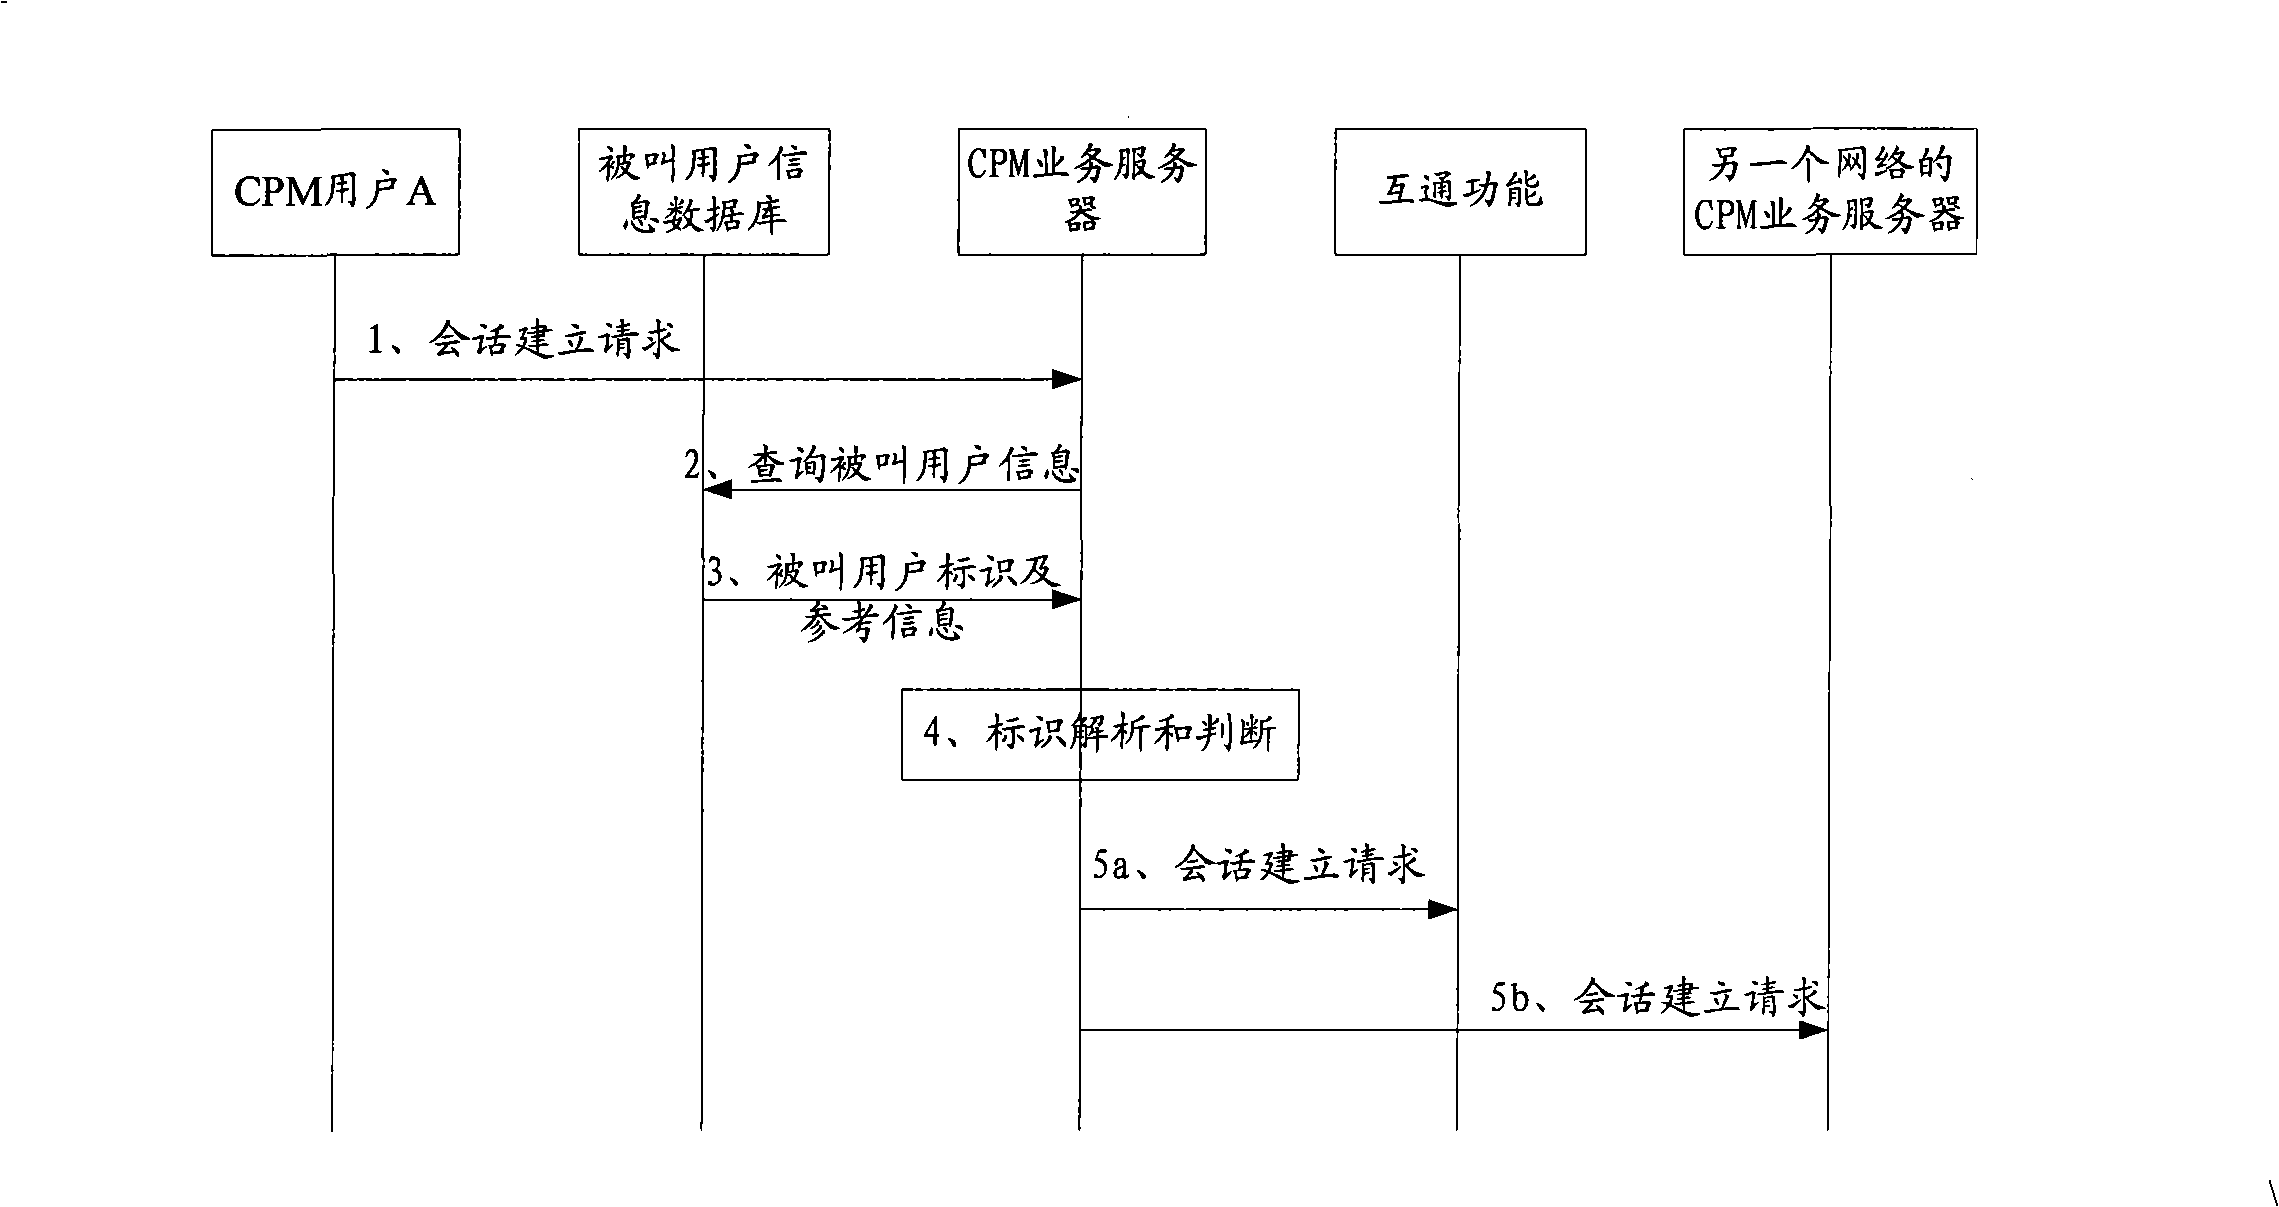 Method and system for communicating with customer supporting multiple message services